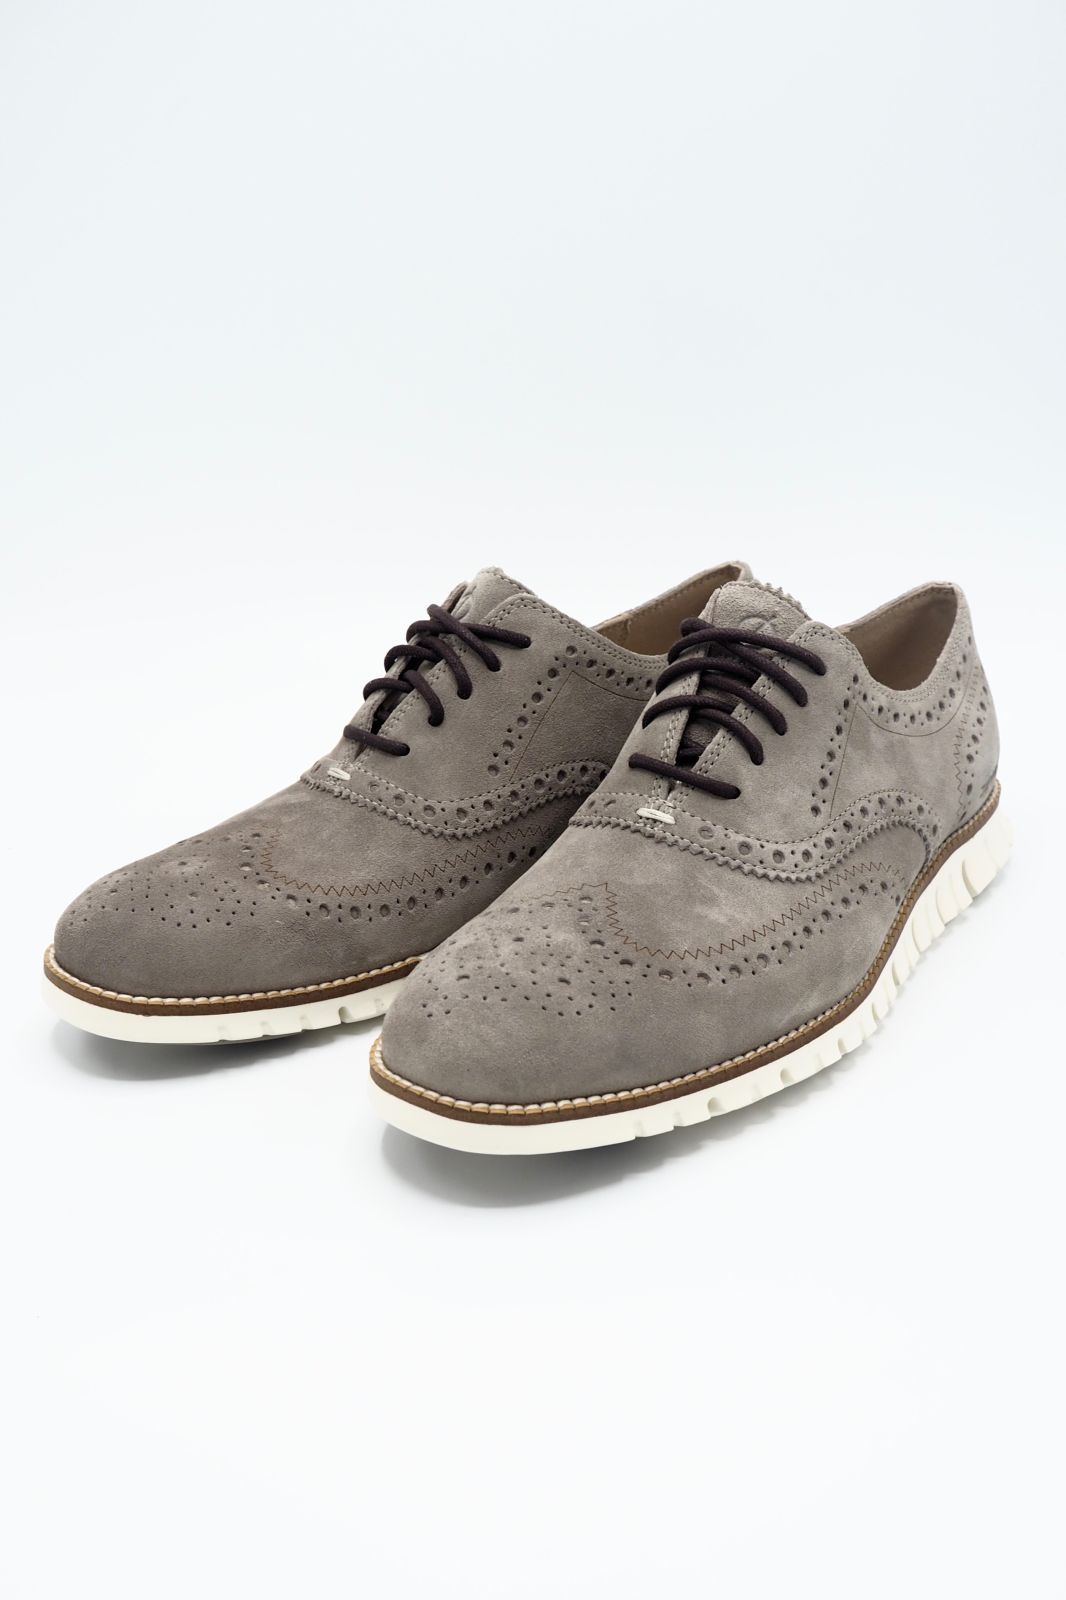 Cole Haan molière Taupe hommes (ColeHaan-Zero Ground - C31163 Nub Taupe) - Marine | Much more than shoes